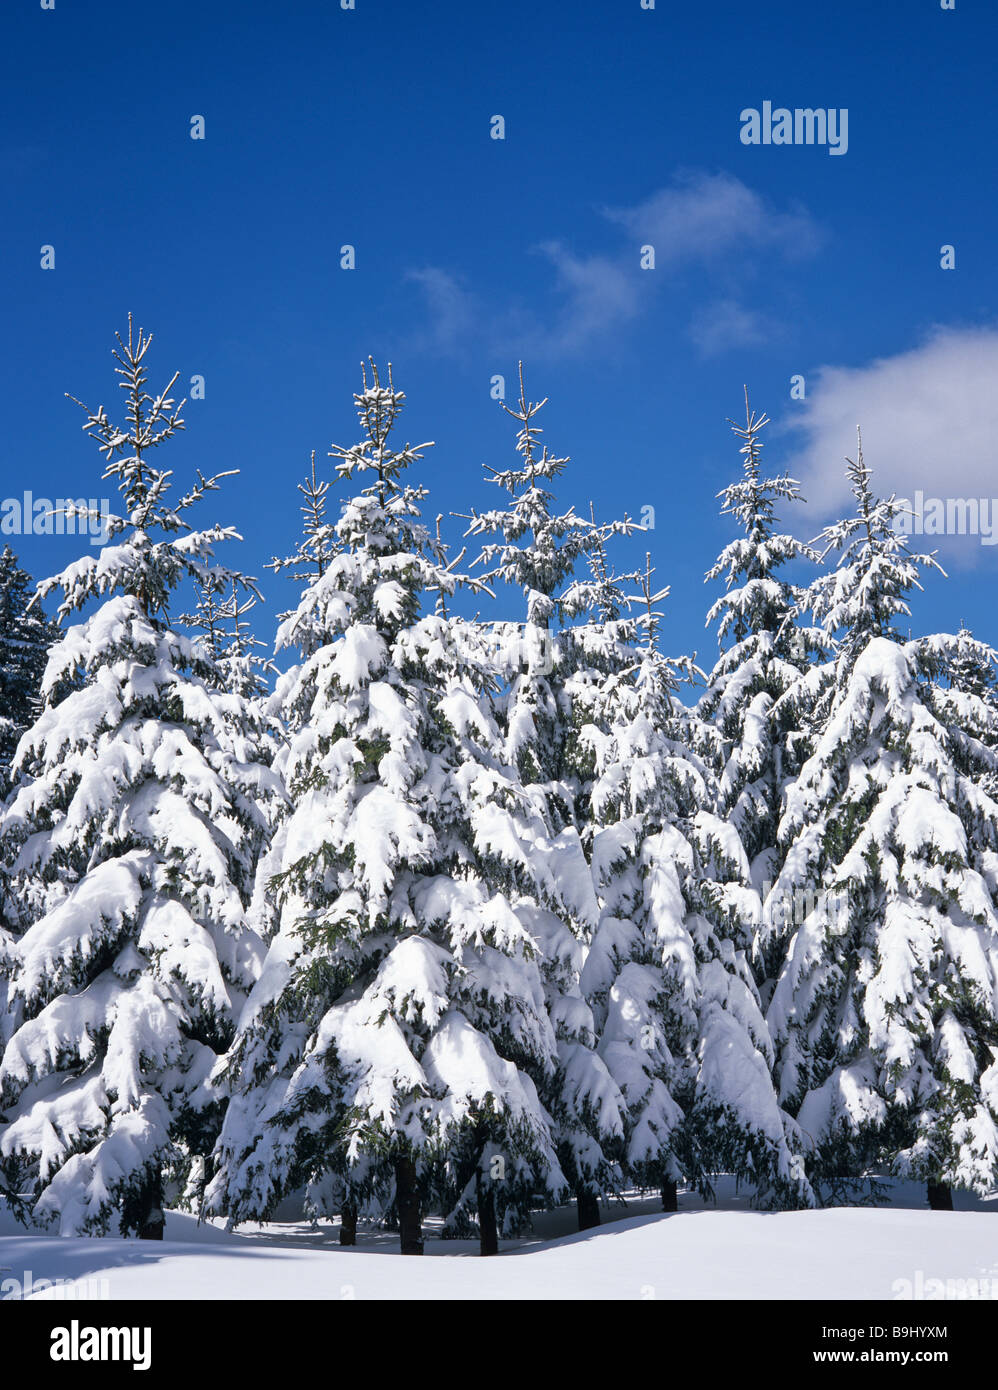 Fir trees, forest, snow-covered winter landscape, fresh snow Stock Photo